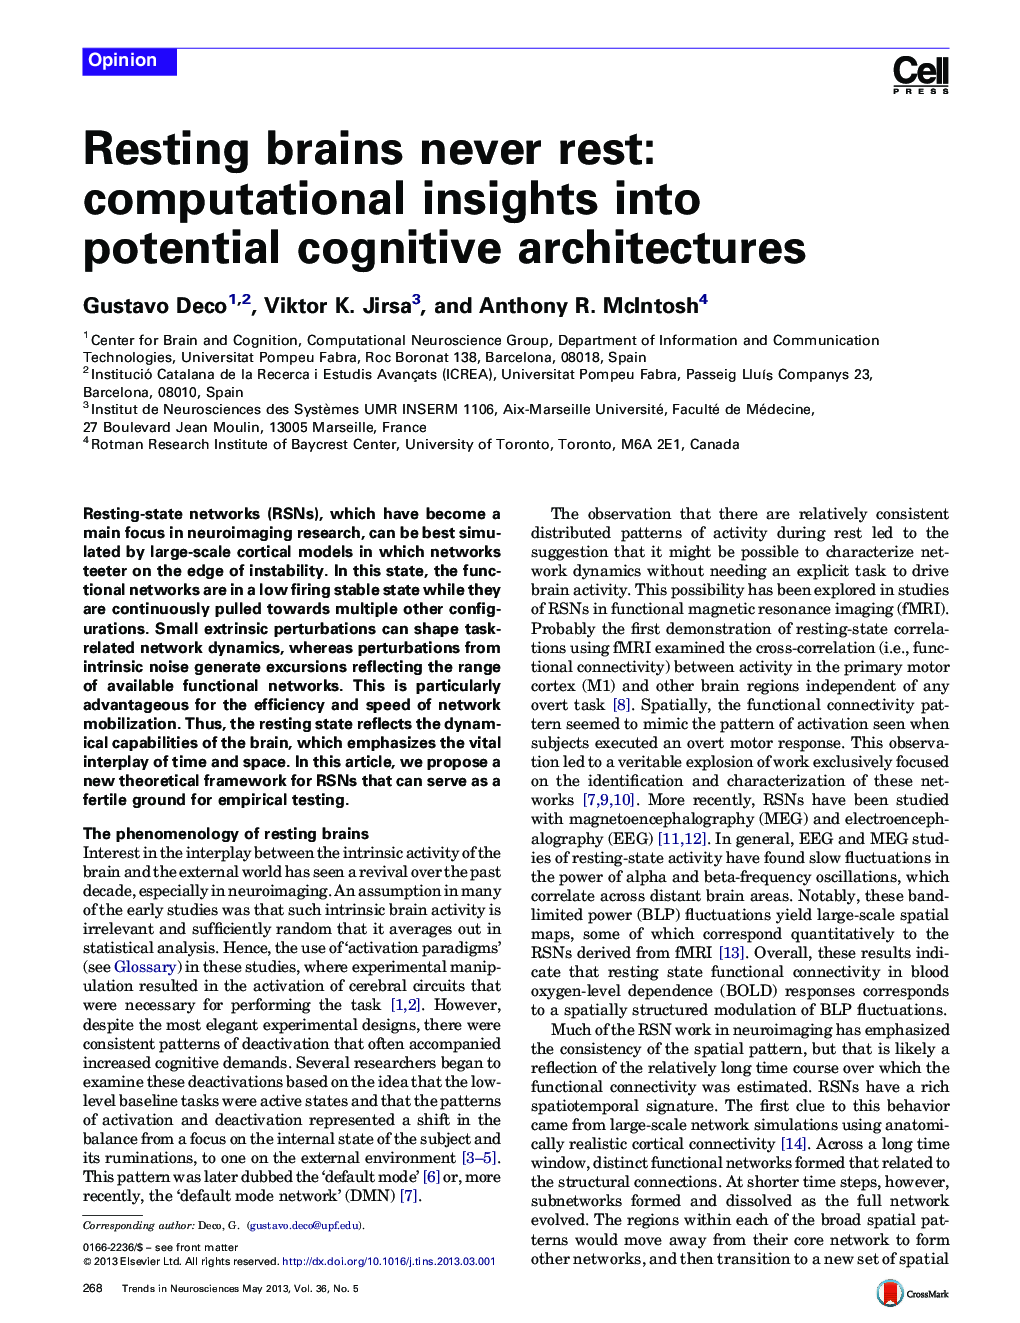 Resting brains never rest: computational insights into potential cognitive architectures